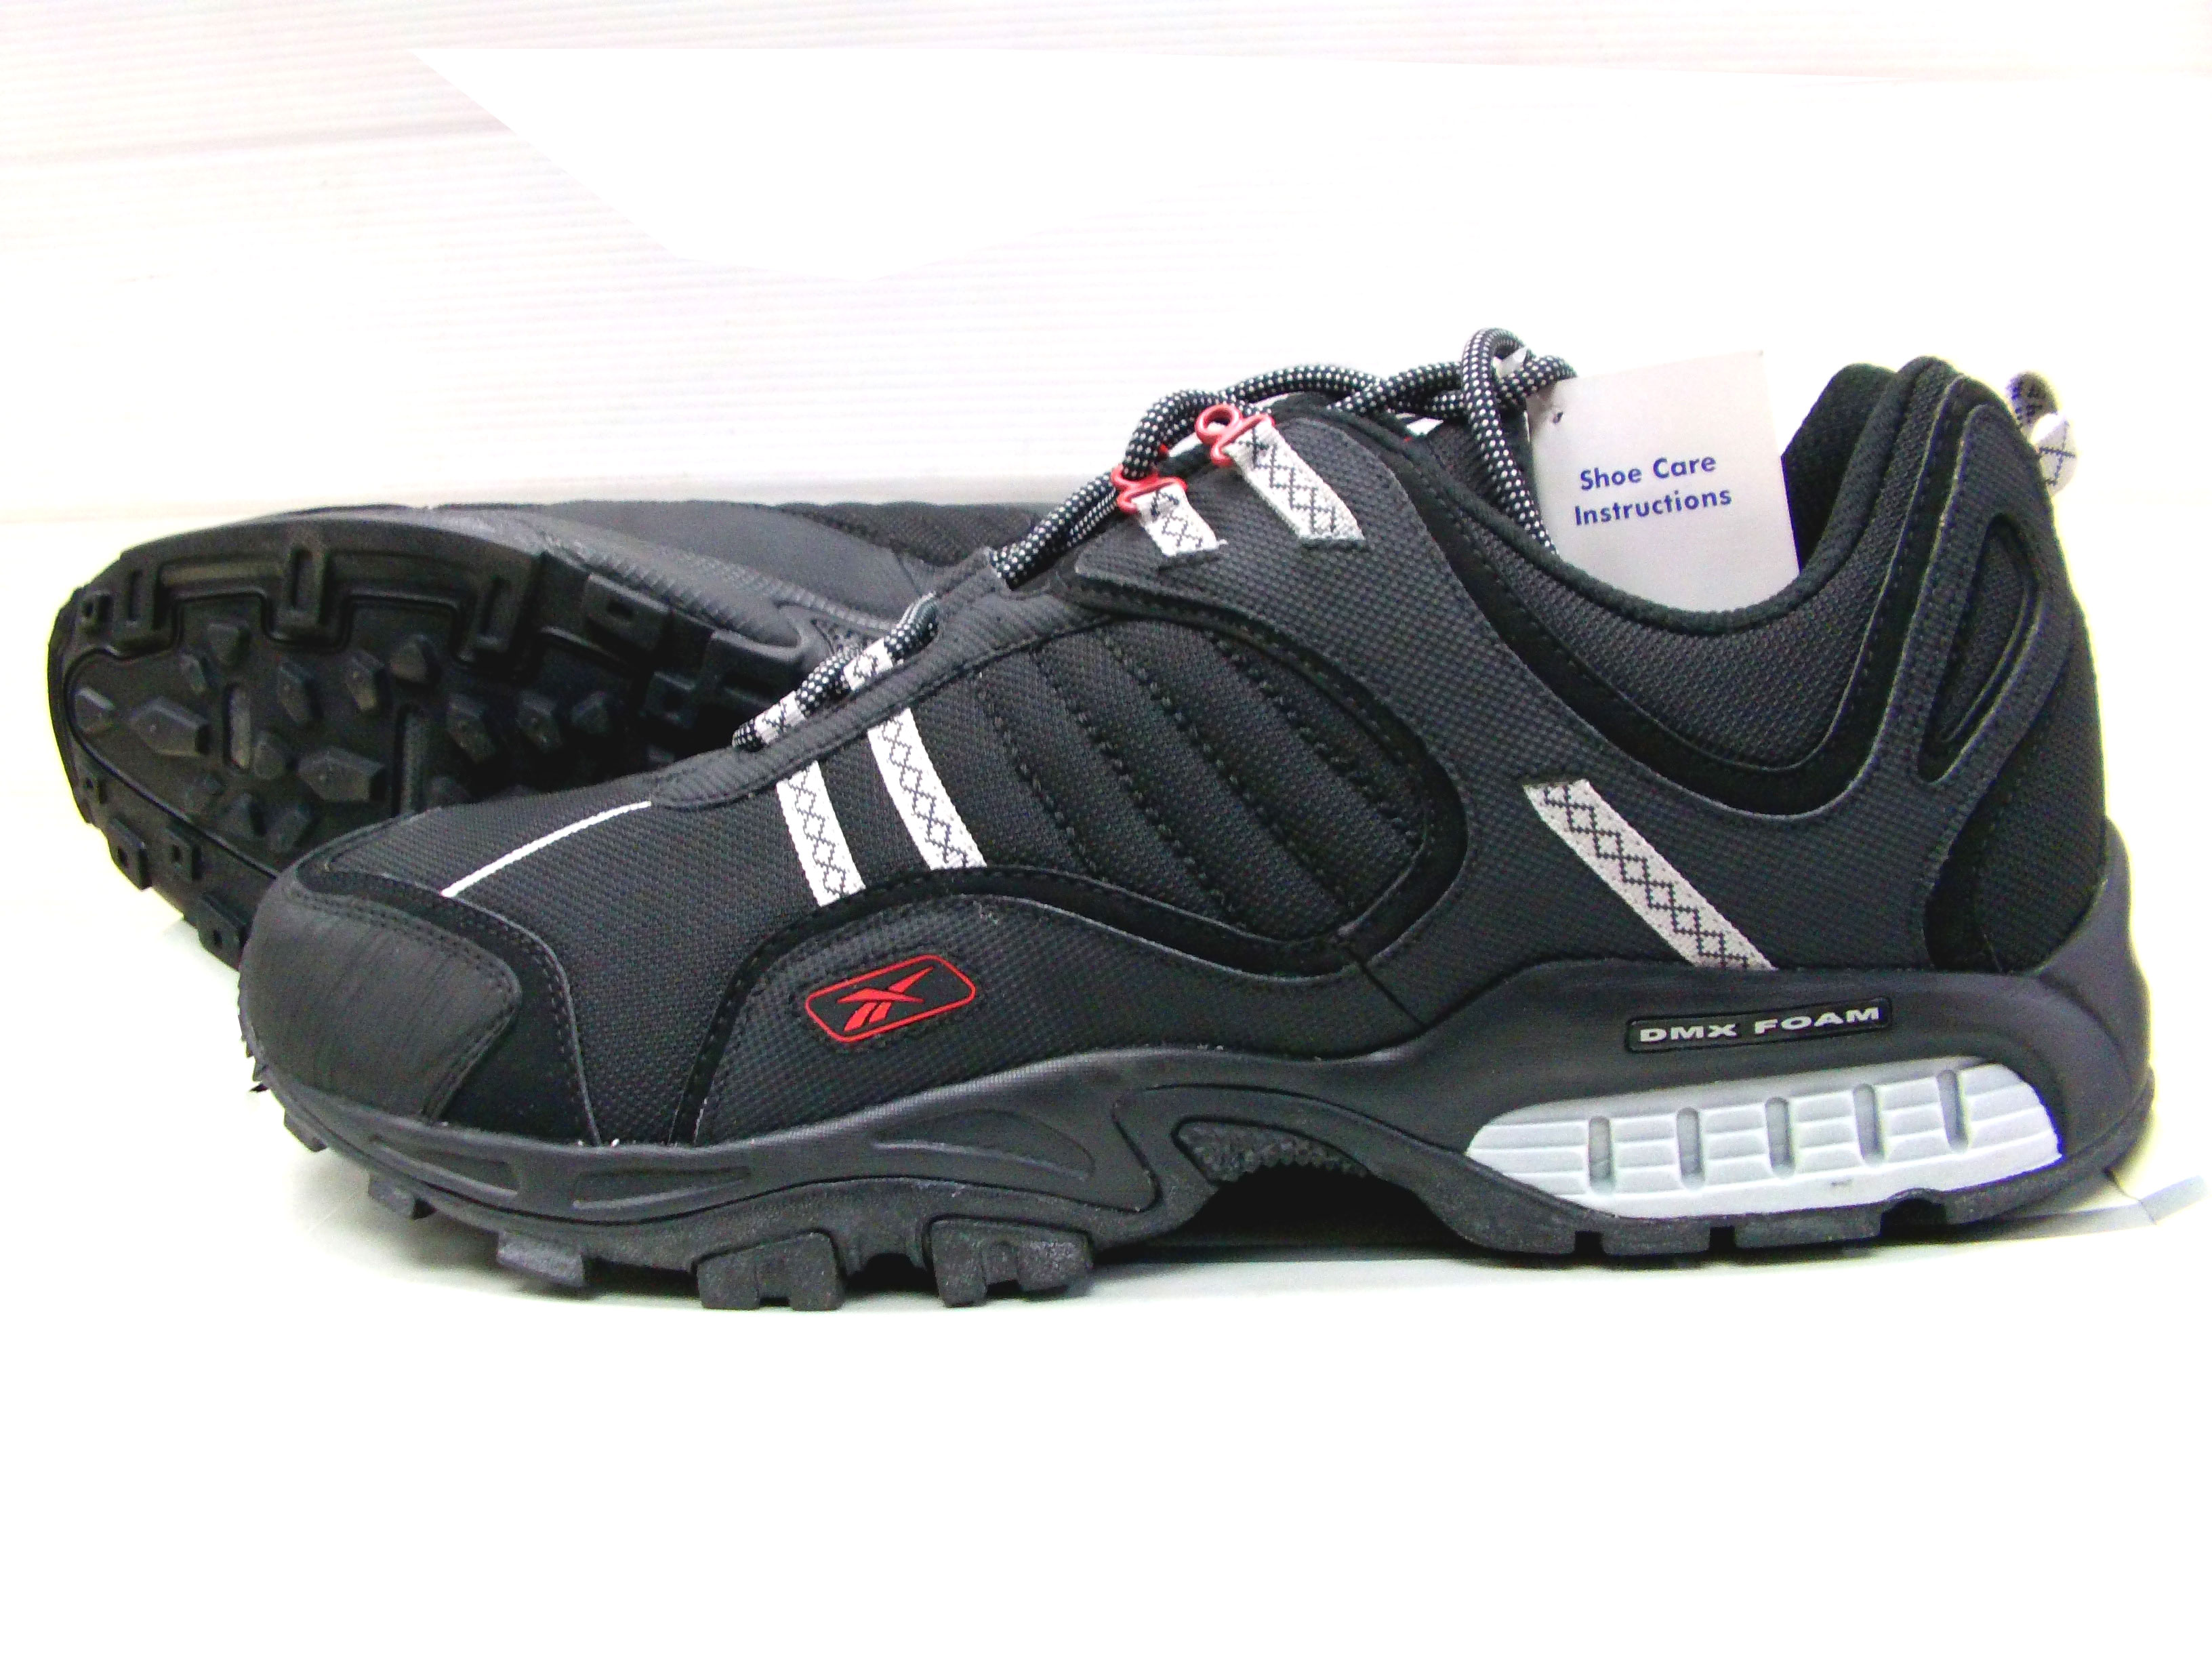 Reebok Trail Rider shoes UK 14 No Box was 70 Now 39.99